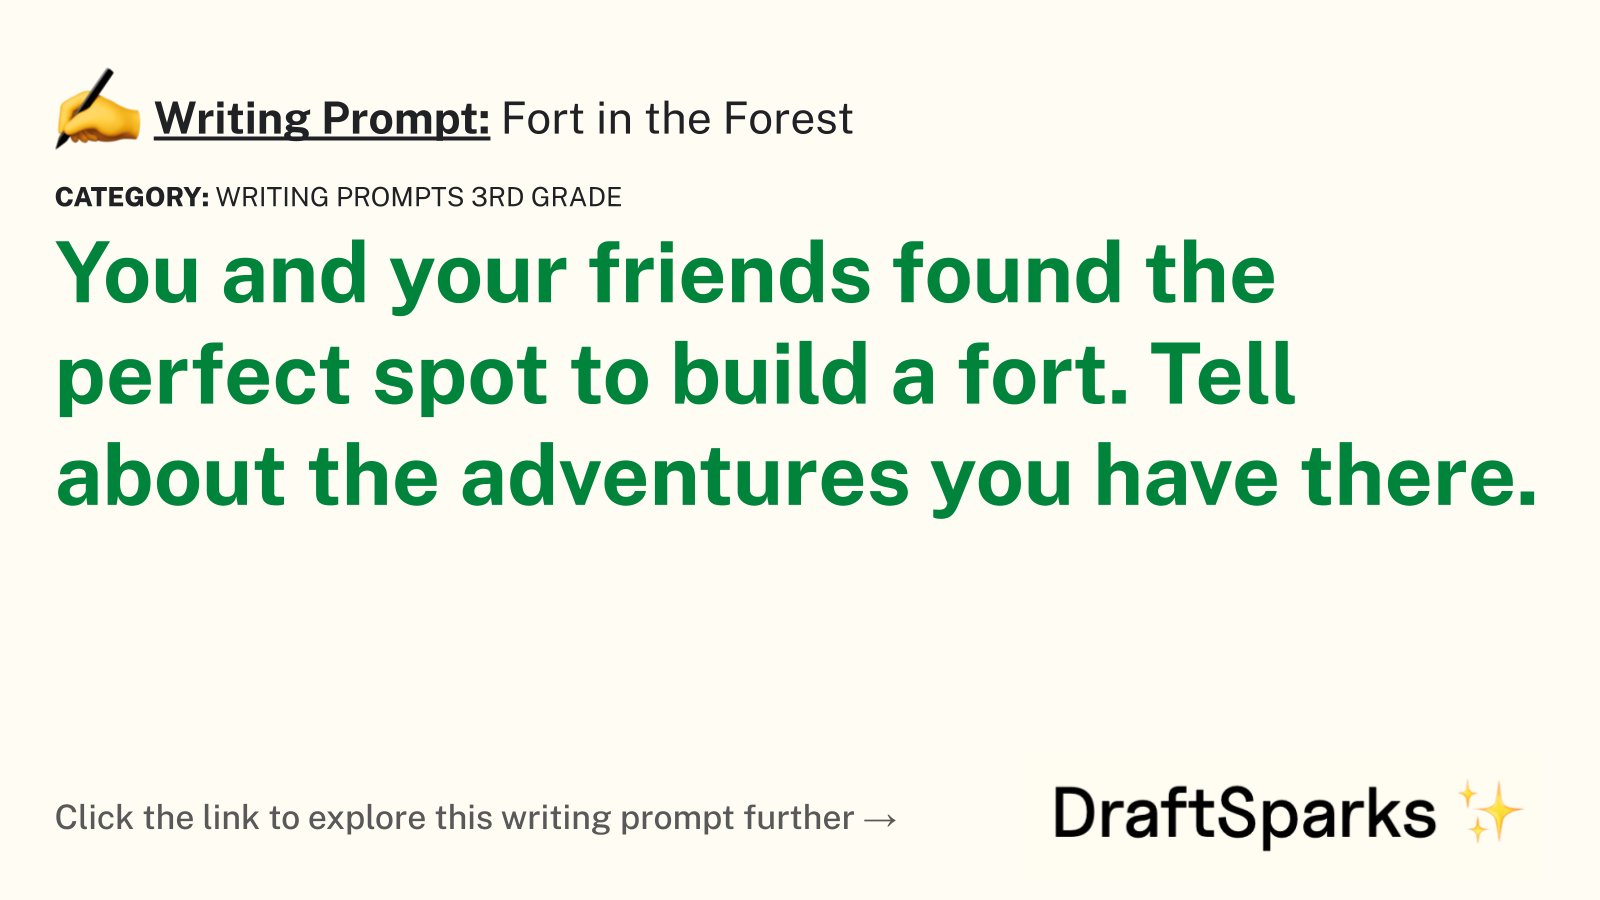 Fort in the Forest